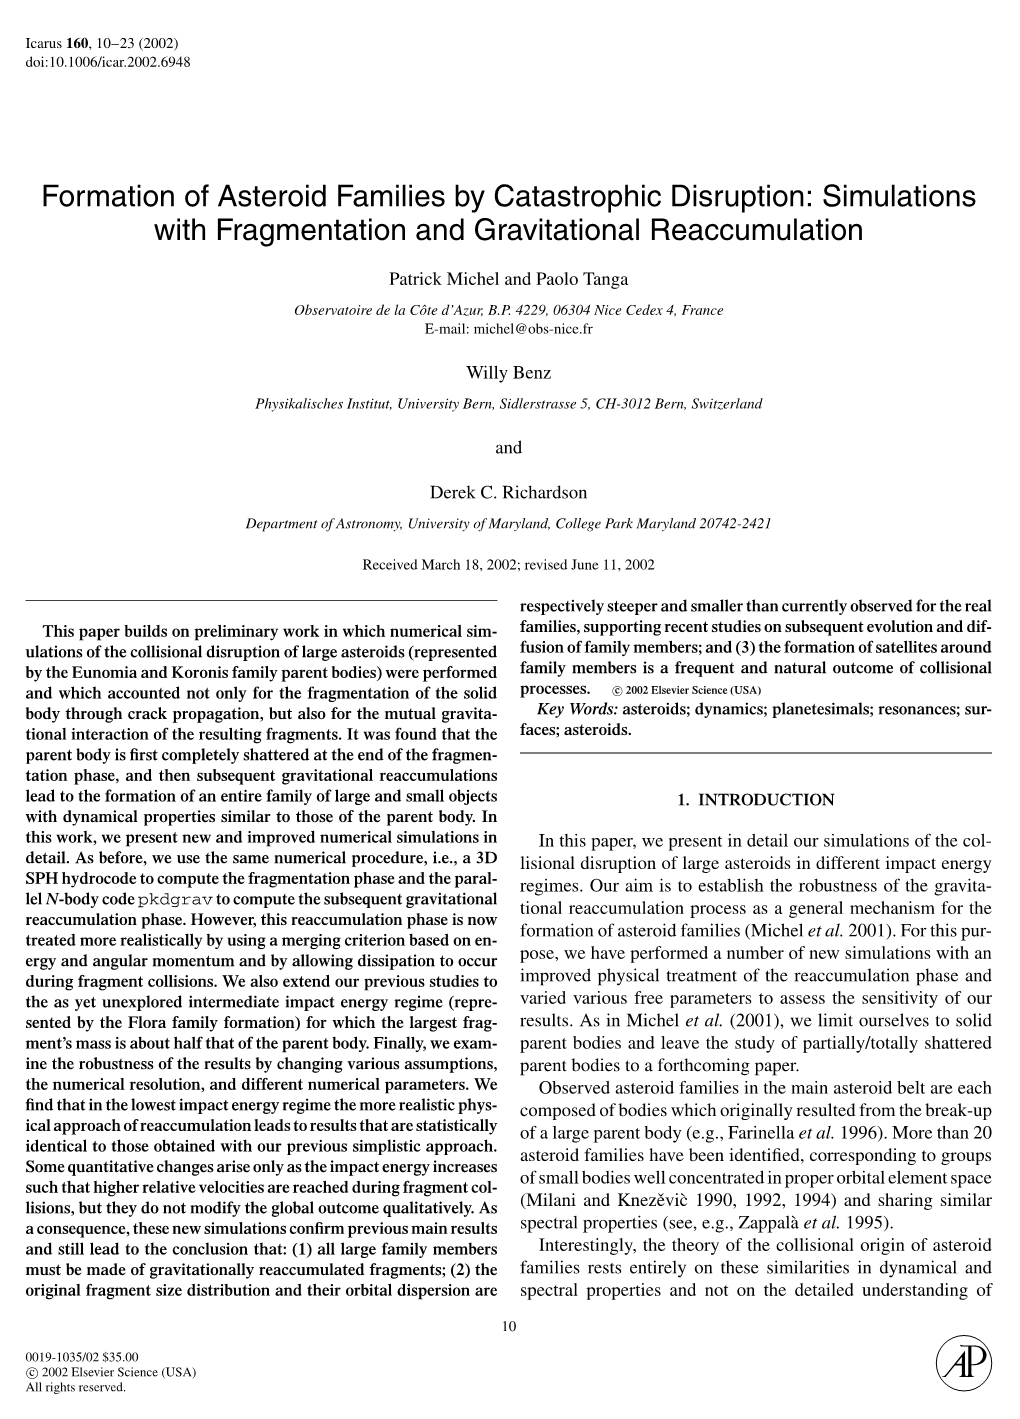 Formation of Asteroid Families by Catastrophic Disruption: Simulations with Fragmentation and Gravitational Reaccumulation